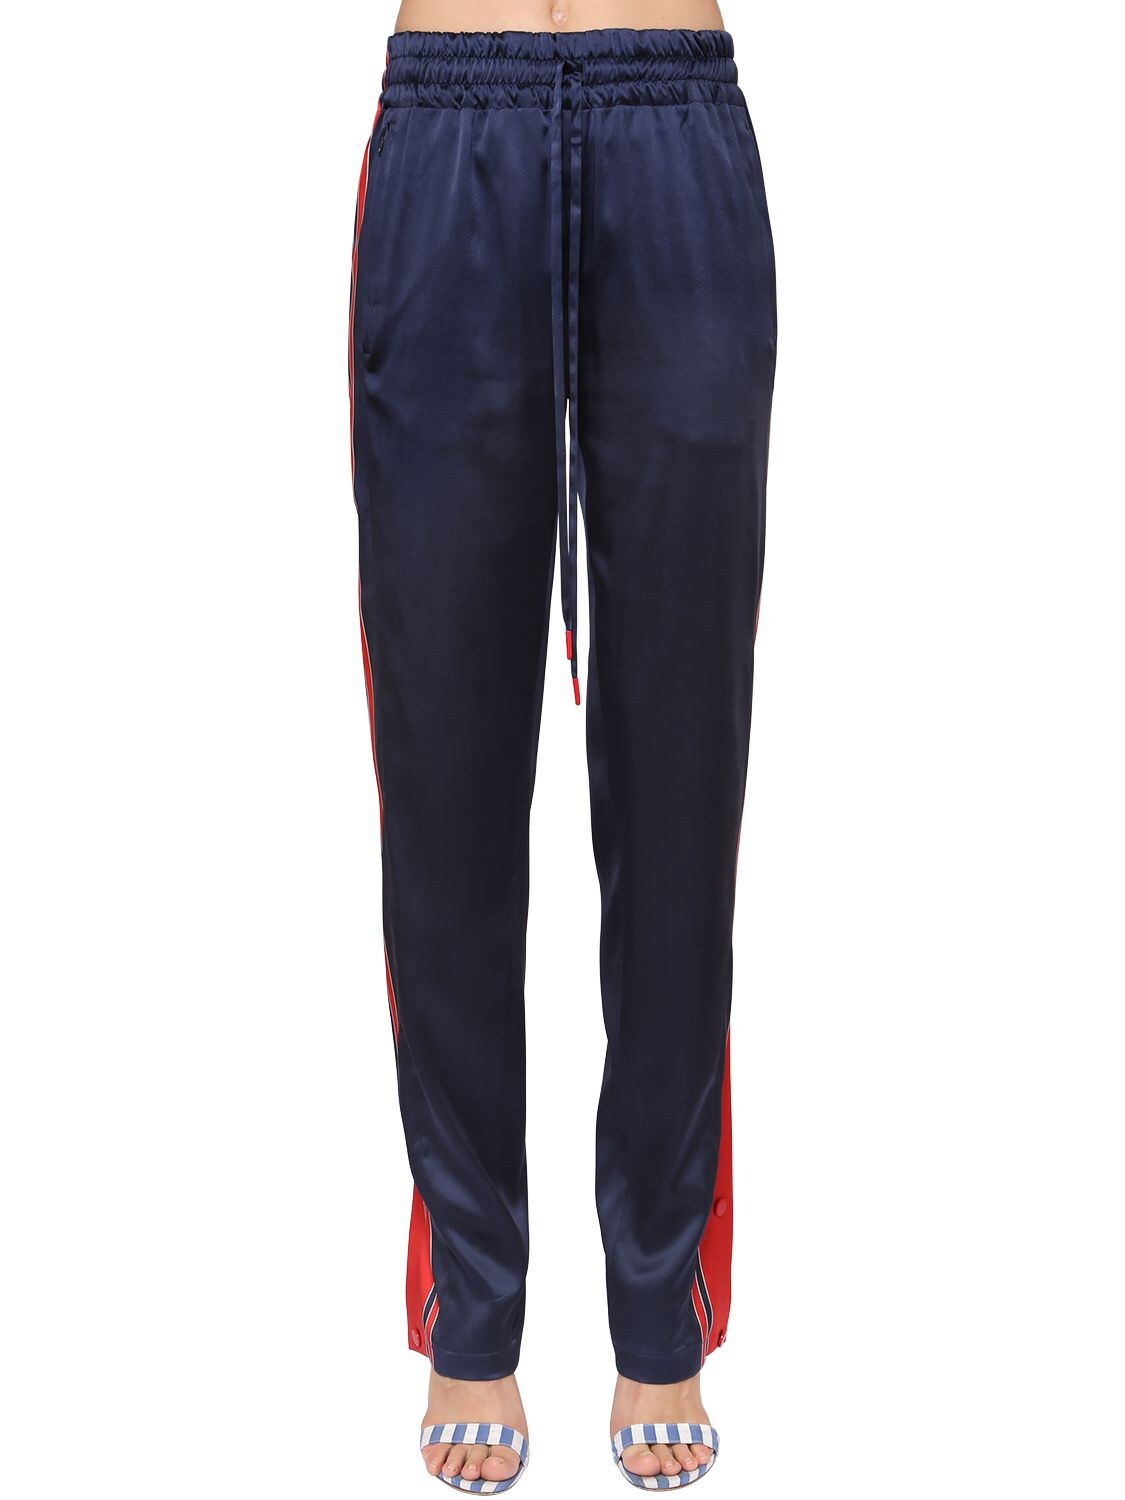 Monse Satin Track Pants W/ Snap Buttons In Blue/red